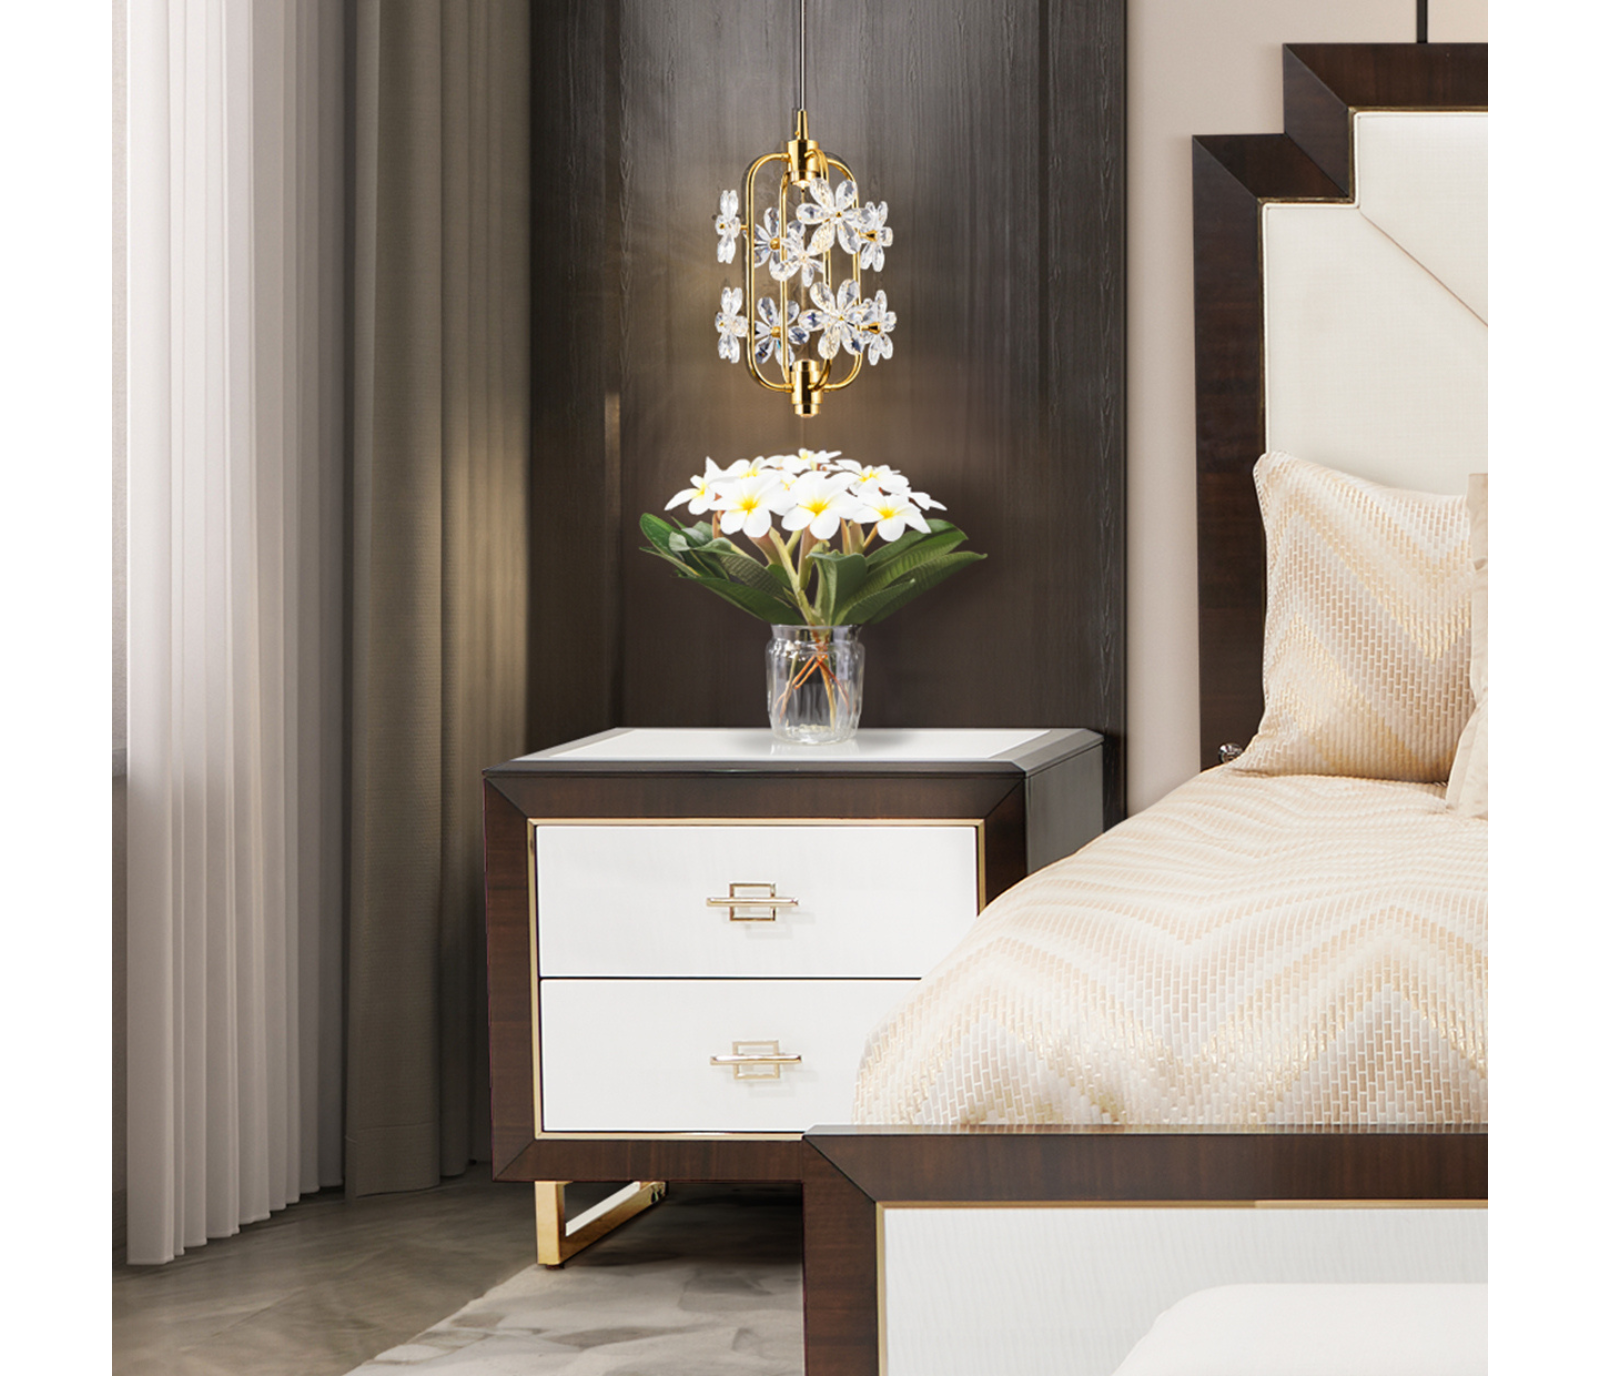 Belmont Place Nightstand